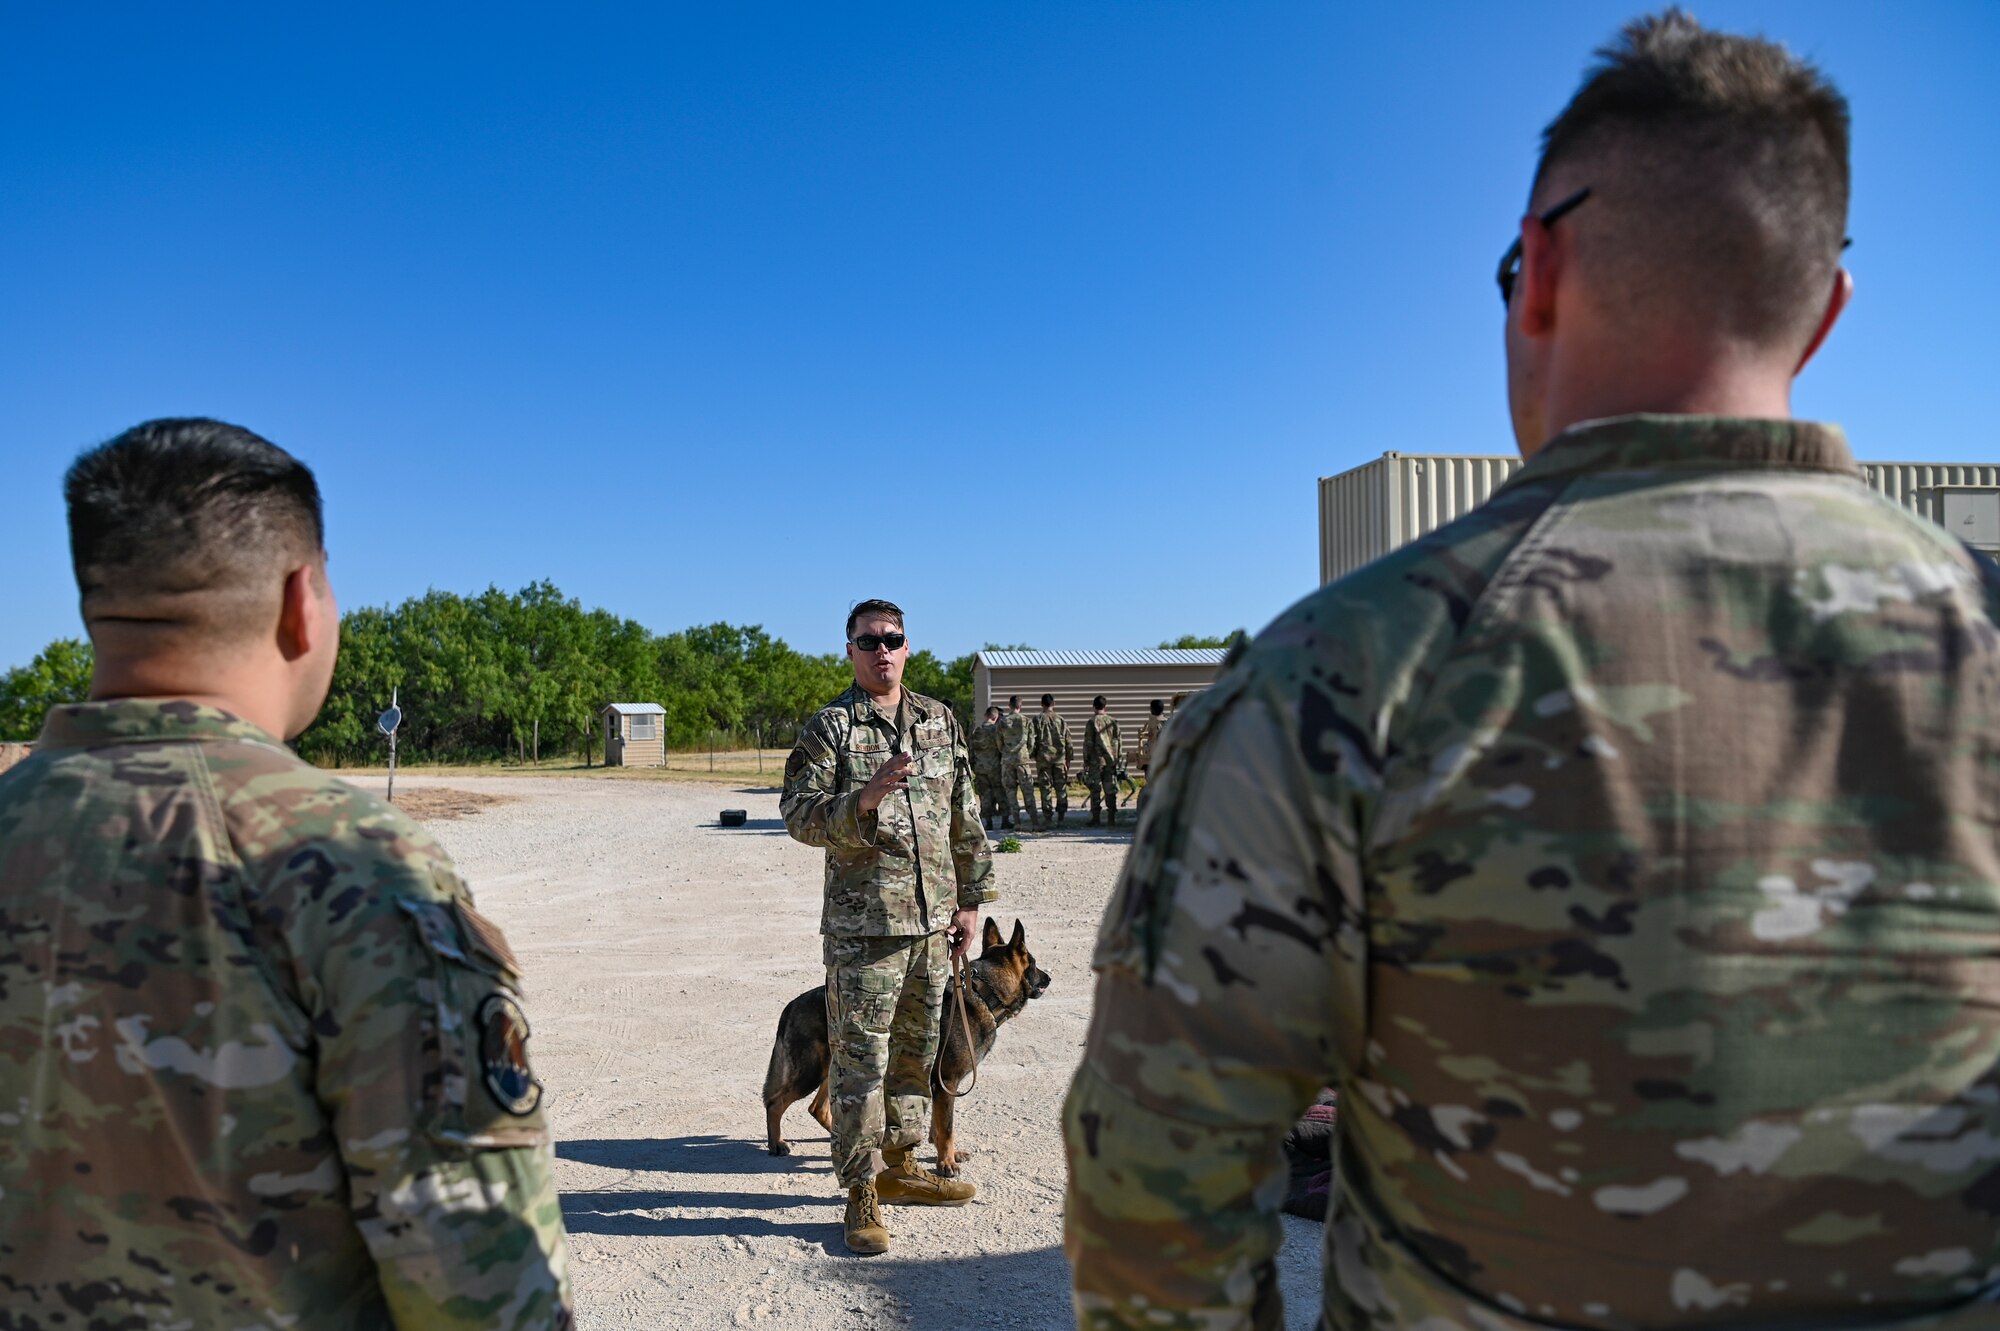 U.S. Air Force Staff Sgt. Eric Rendon, 7th Security Forces Squadron military working dog trainer, discusses military working dog capabilities with Air Force ROTC cadets during Project Tuskegee 2.0 at Dyess Air Force Base, Texas, Aug. 2, 2023. The project is intended to increase the cadets' understanding of Air Force and Space Force missions and day-to-day operations. The 19 cadets in attendance represent 19 different Air Force ROTC detachments across the enterprise's four regions. (U.S. Air Force photo by Airman 1st Class Emma Anderson)